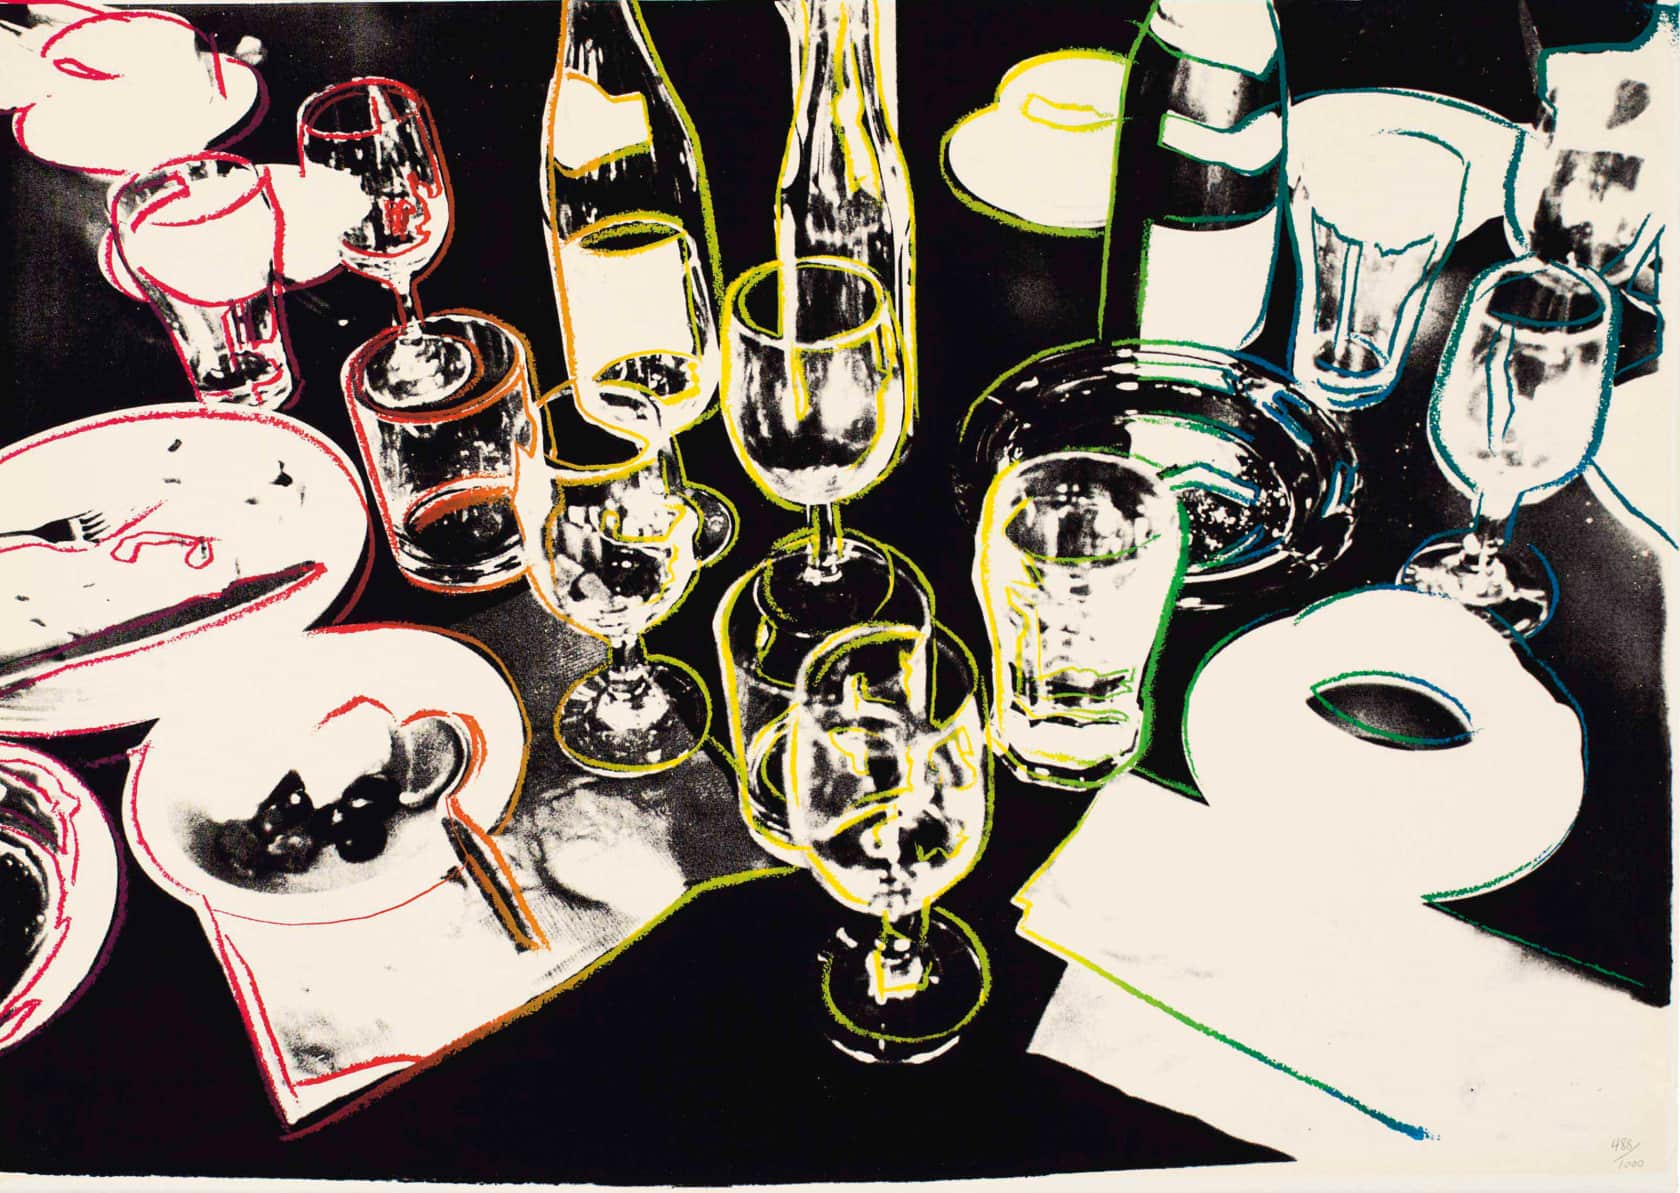 Andy Warhol, After the Party, 1979